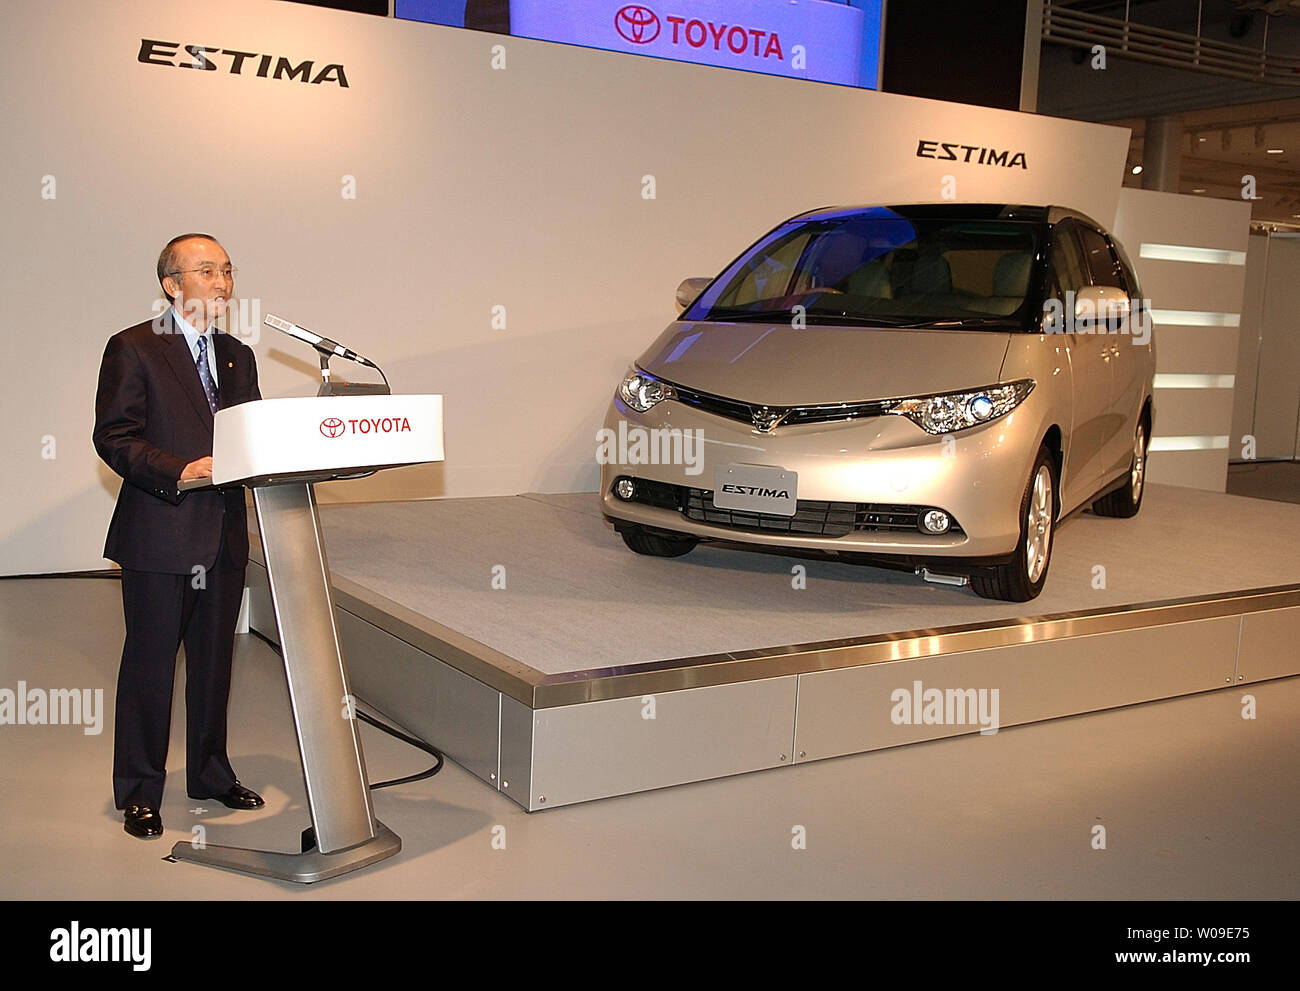 Katsuaki Watanabe, president of Toyota Motor Corporation, presented the newly-designed ESTIMA minivan to the press in Tokyo, Japan, on Jan. 16, 2006. The seven-seated vehicle features the second-row seats with a long sliding range of 2.6 feet and built-in leg rests. The third-row seats can be folded into the floor. (UPI Photo/Keizo Mori) Stock Photo